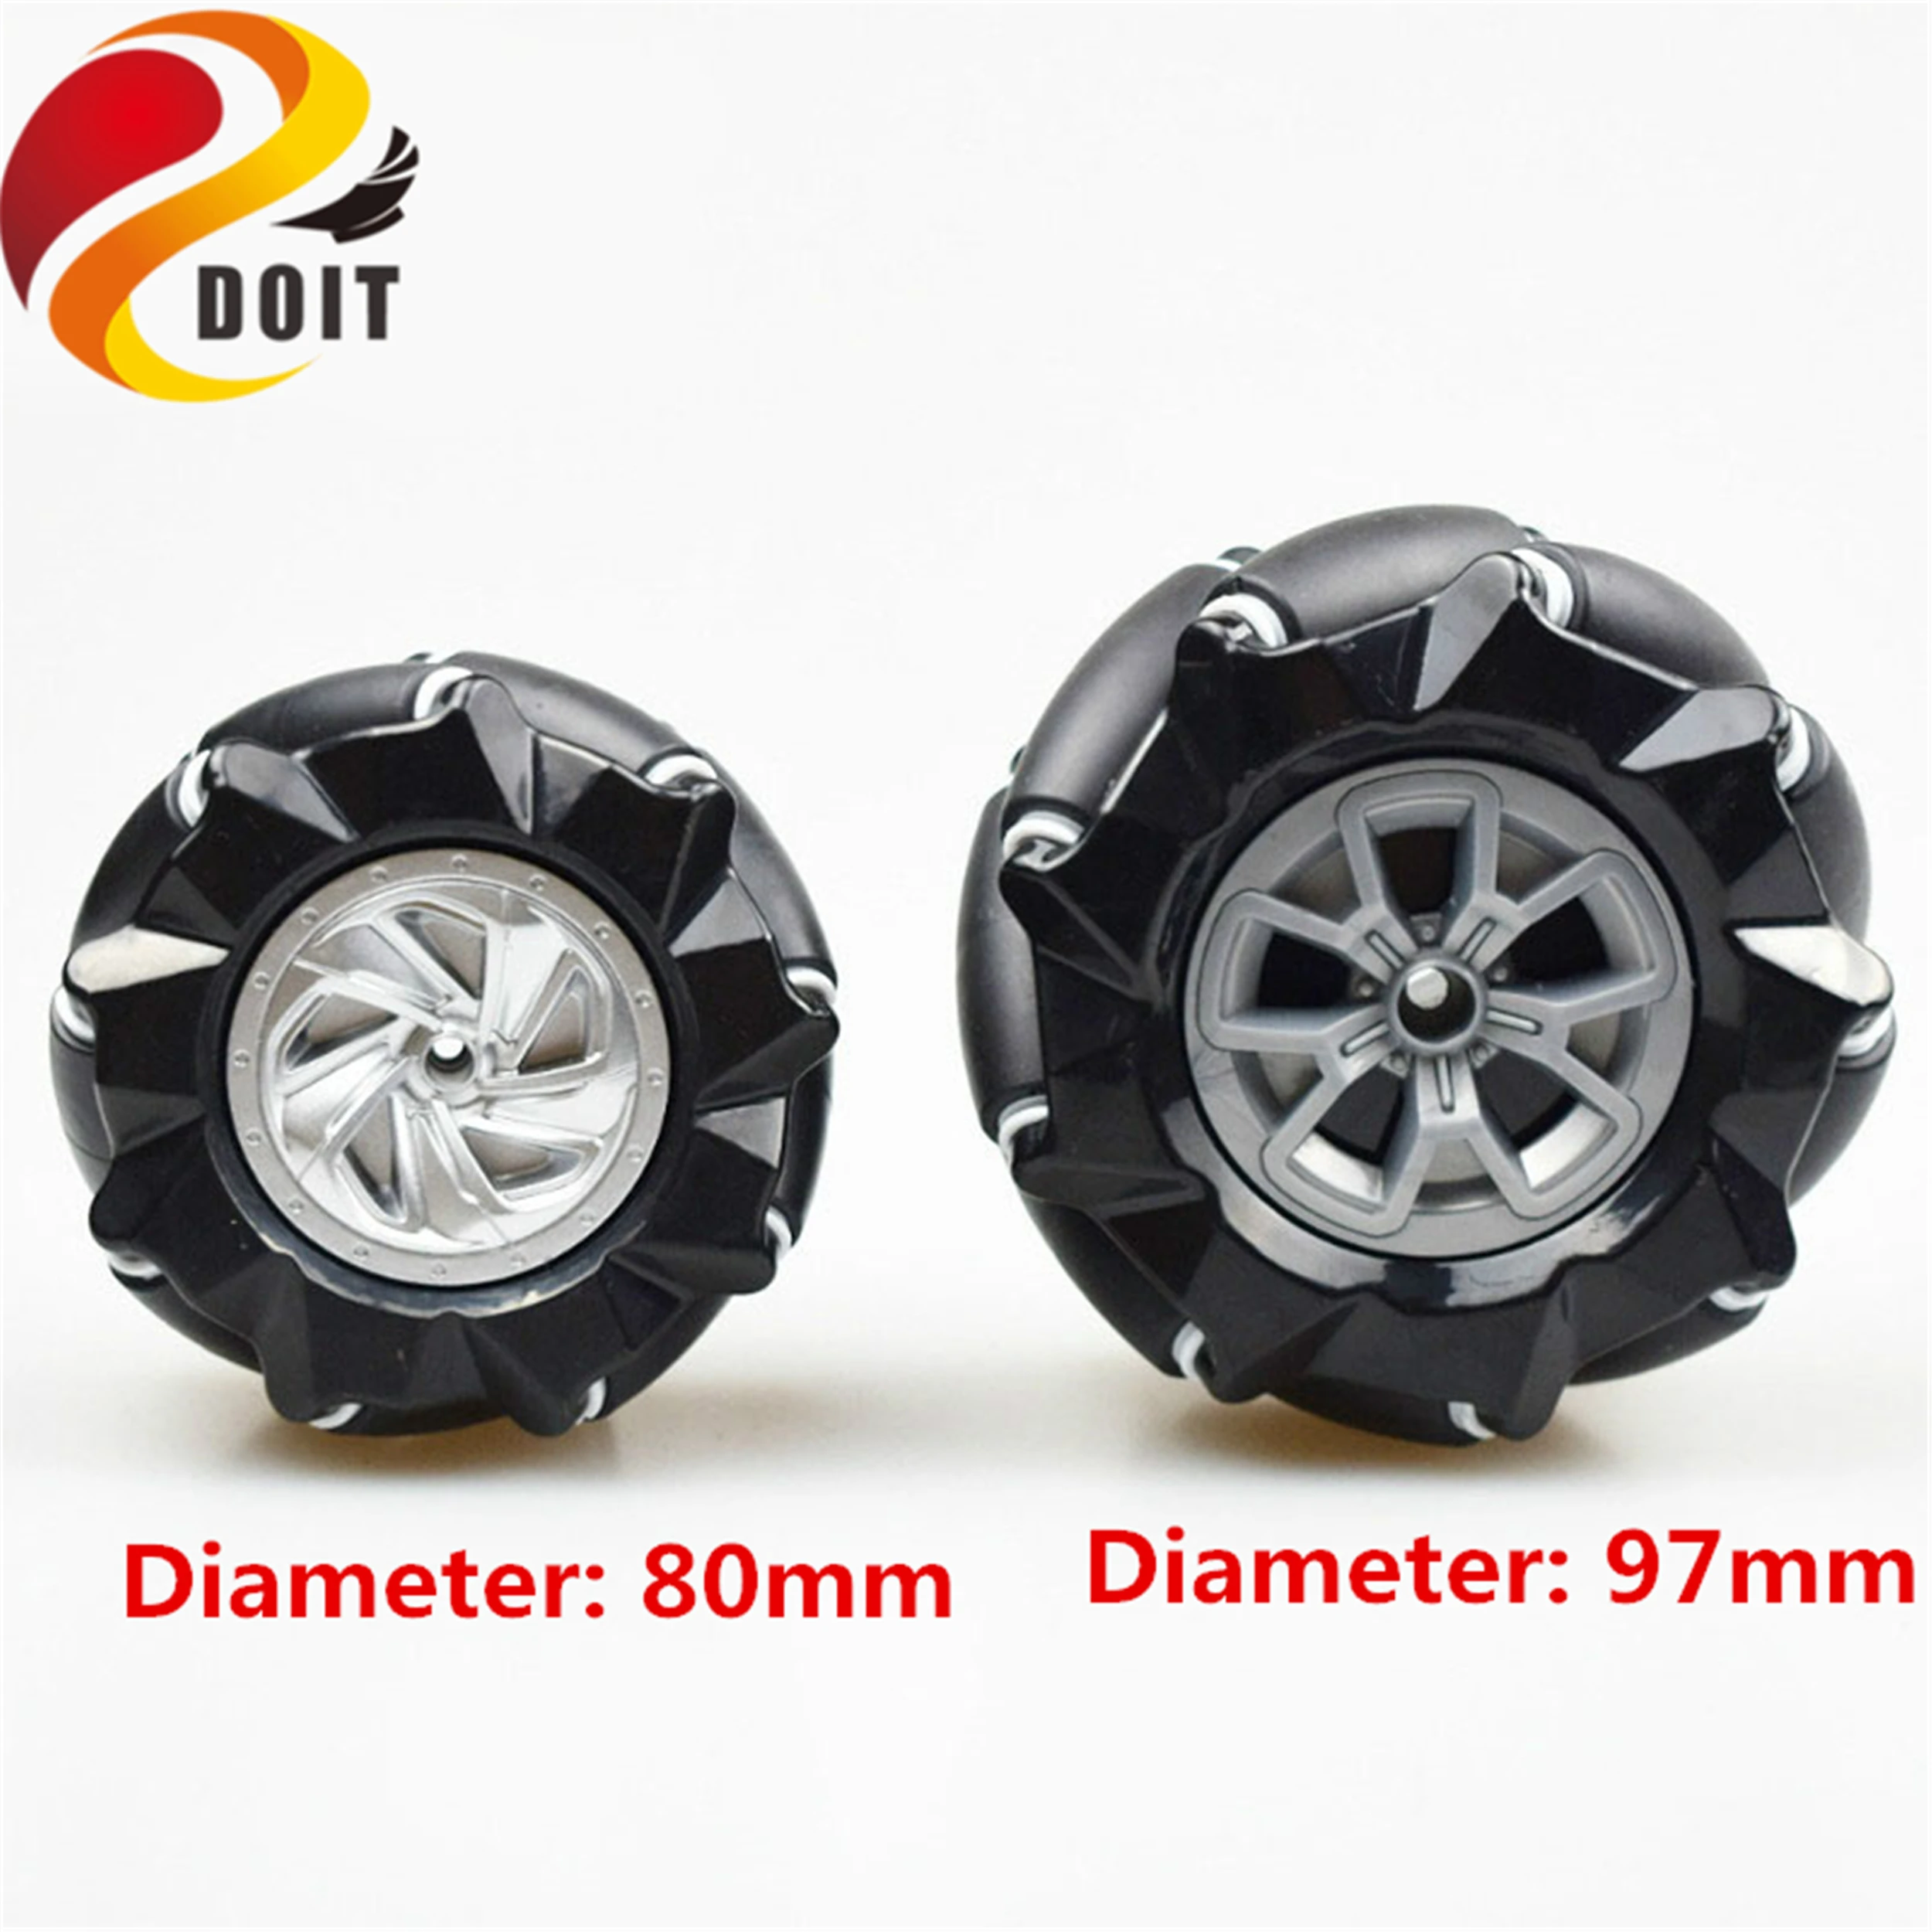 

SZDOIT 4pcs/1 Lot 80mm/97mm McNamm Wheel Omnidirectional Wheel Universal Wheel With 4/5/6mm Coupling For Smart Robot Car Chassis